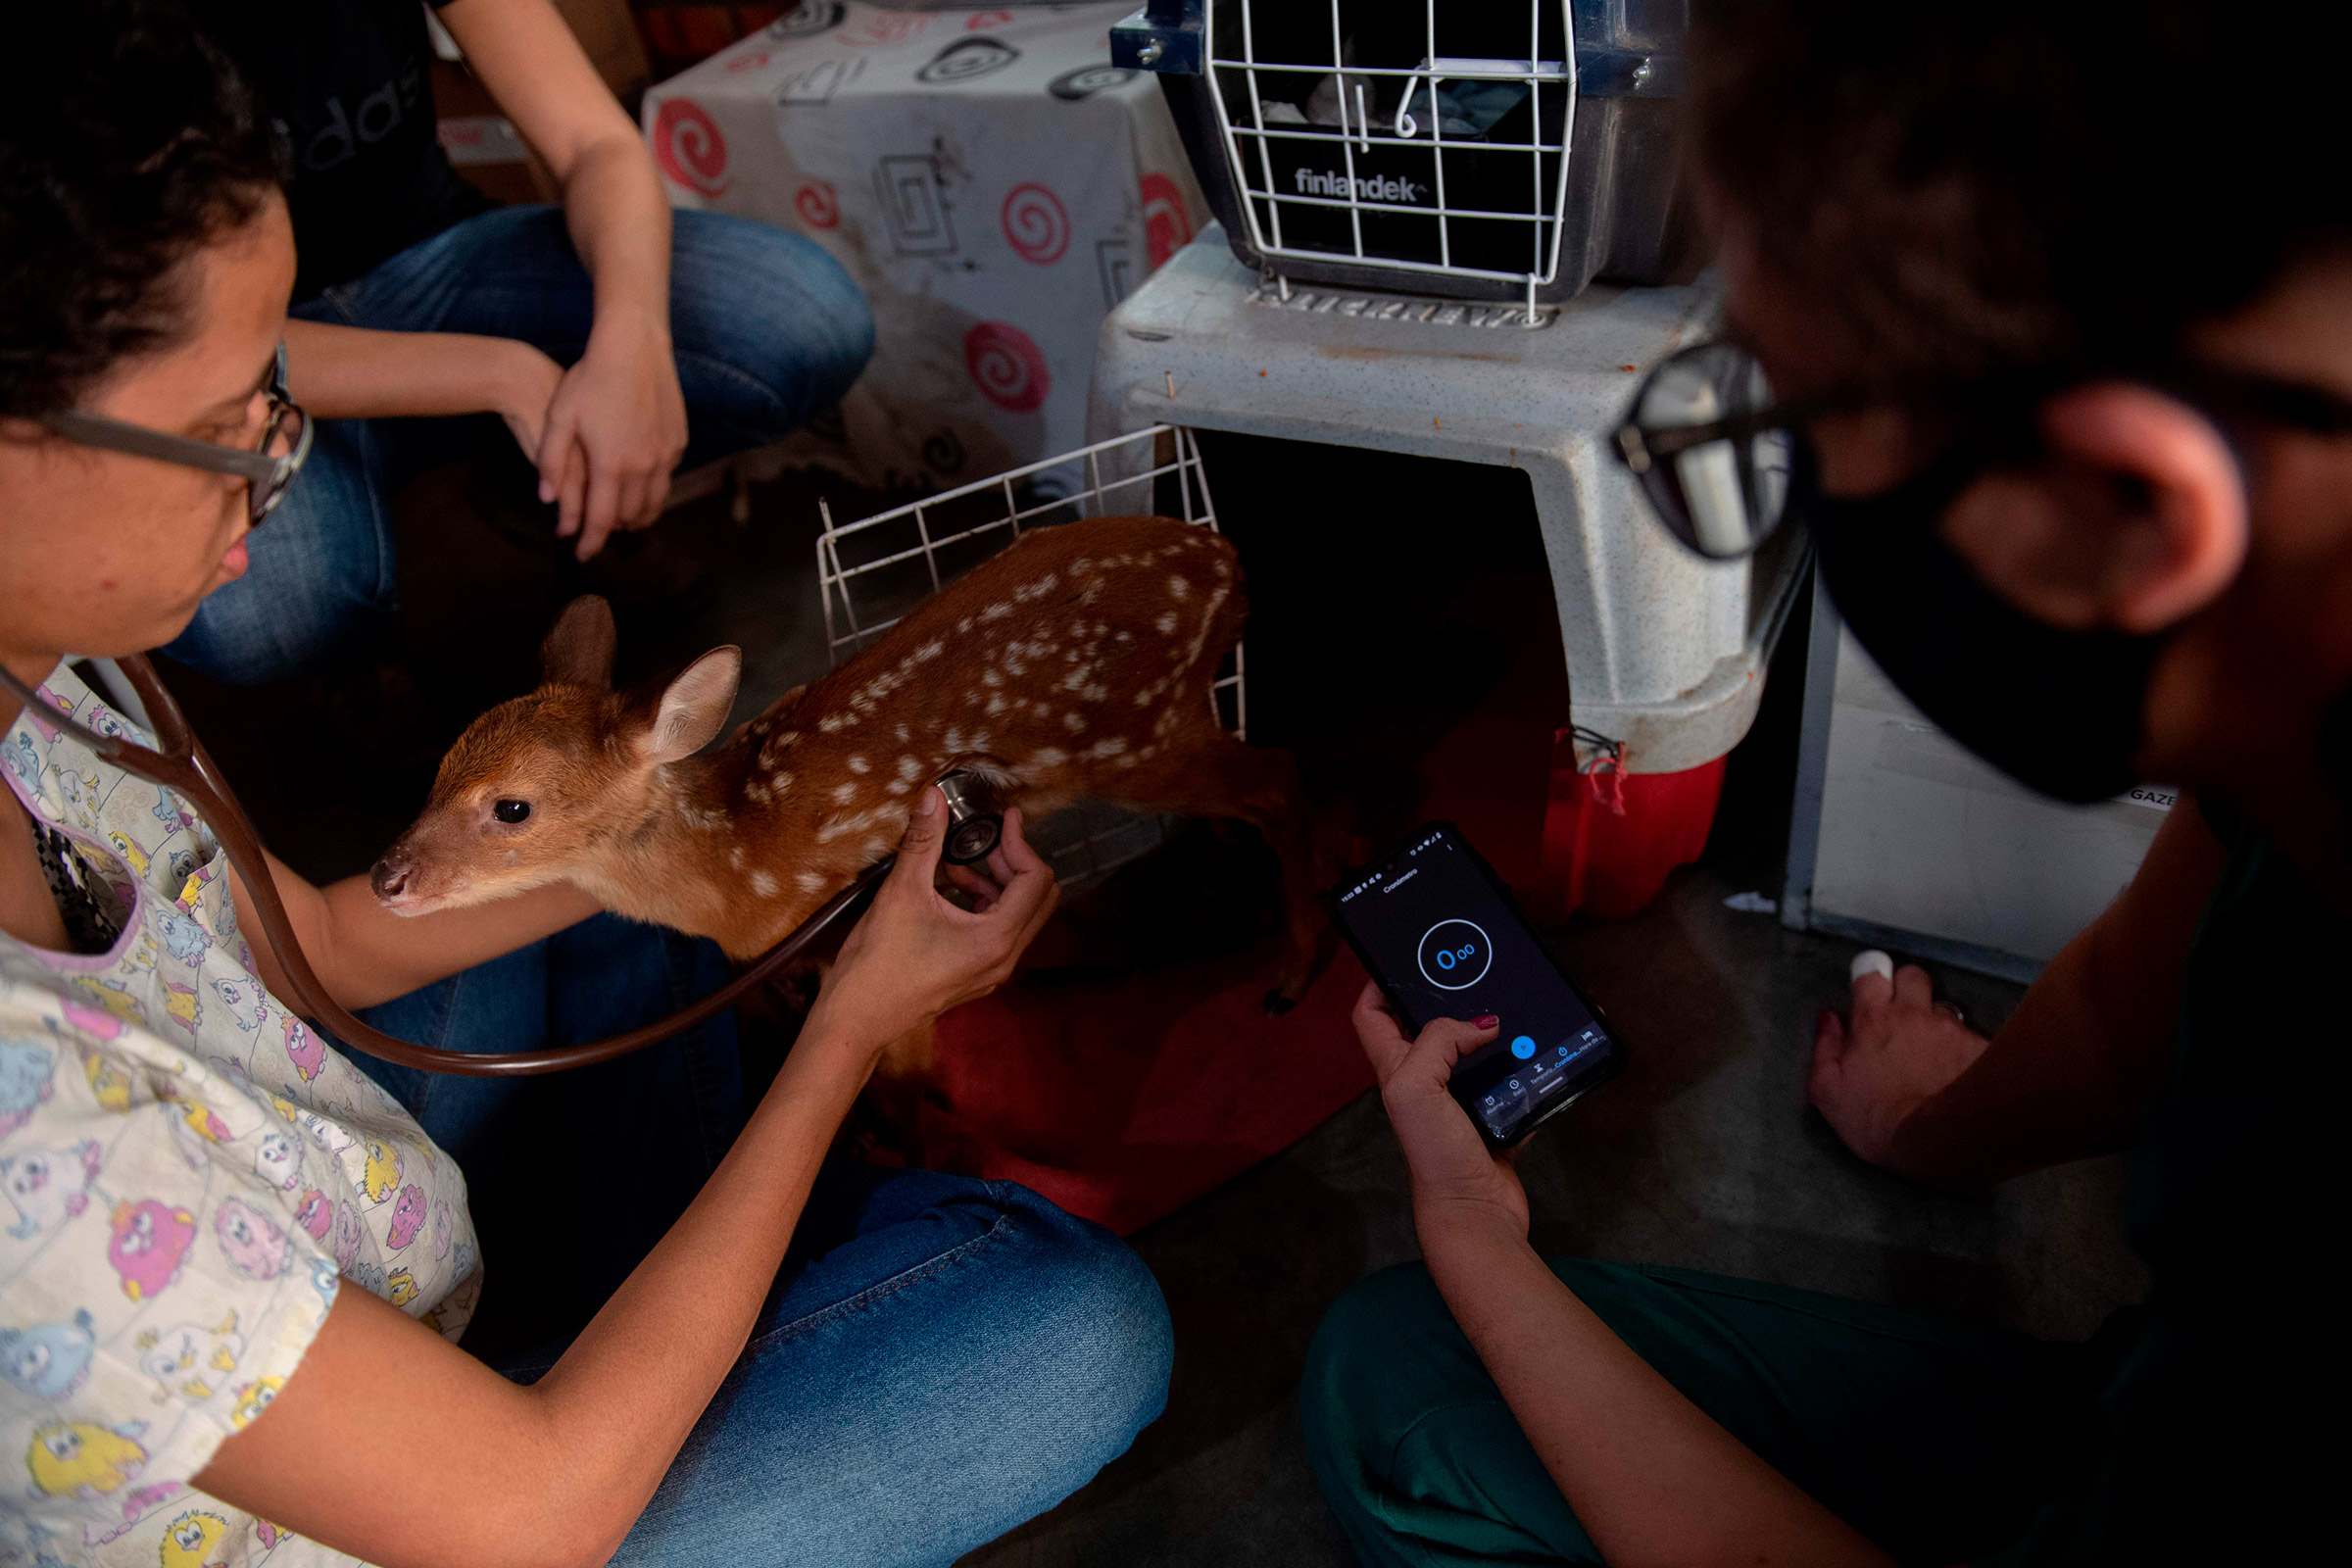 A deer receives care in Brazil's Mato Grosso state on Sept. 17, 2020.